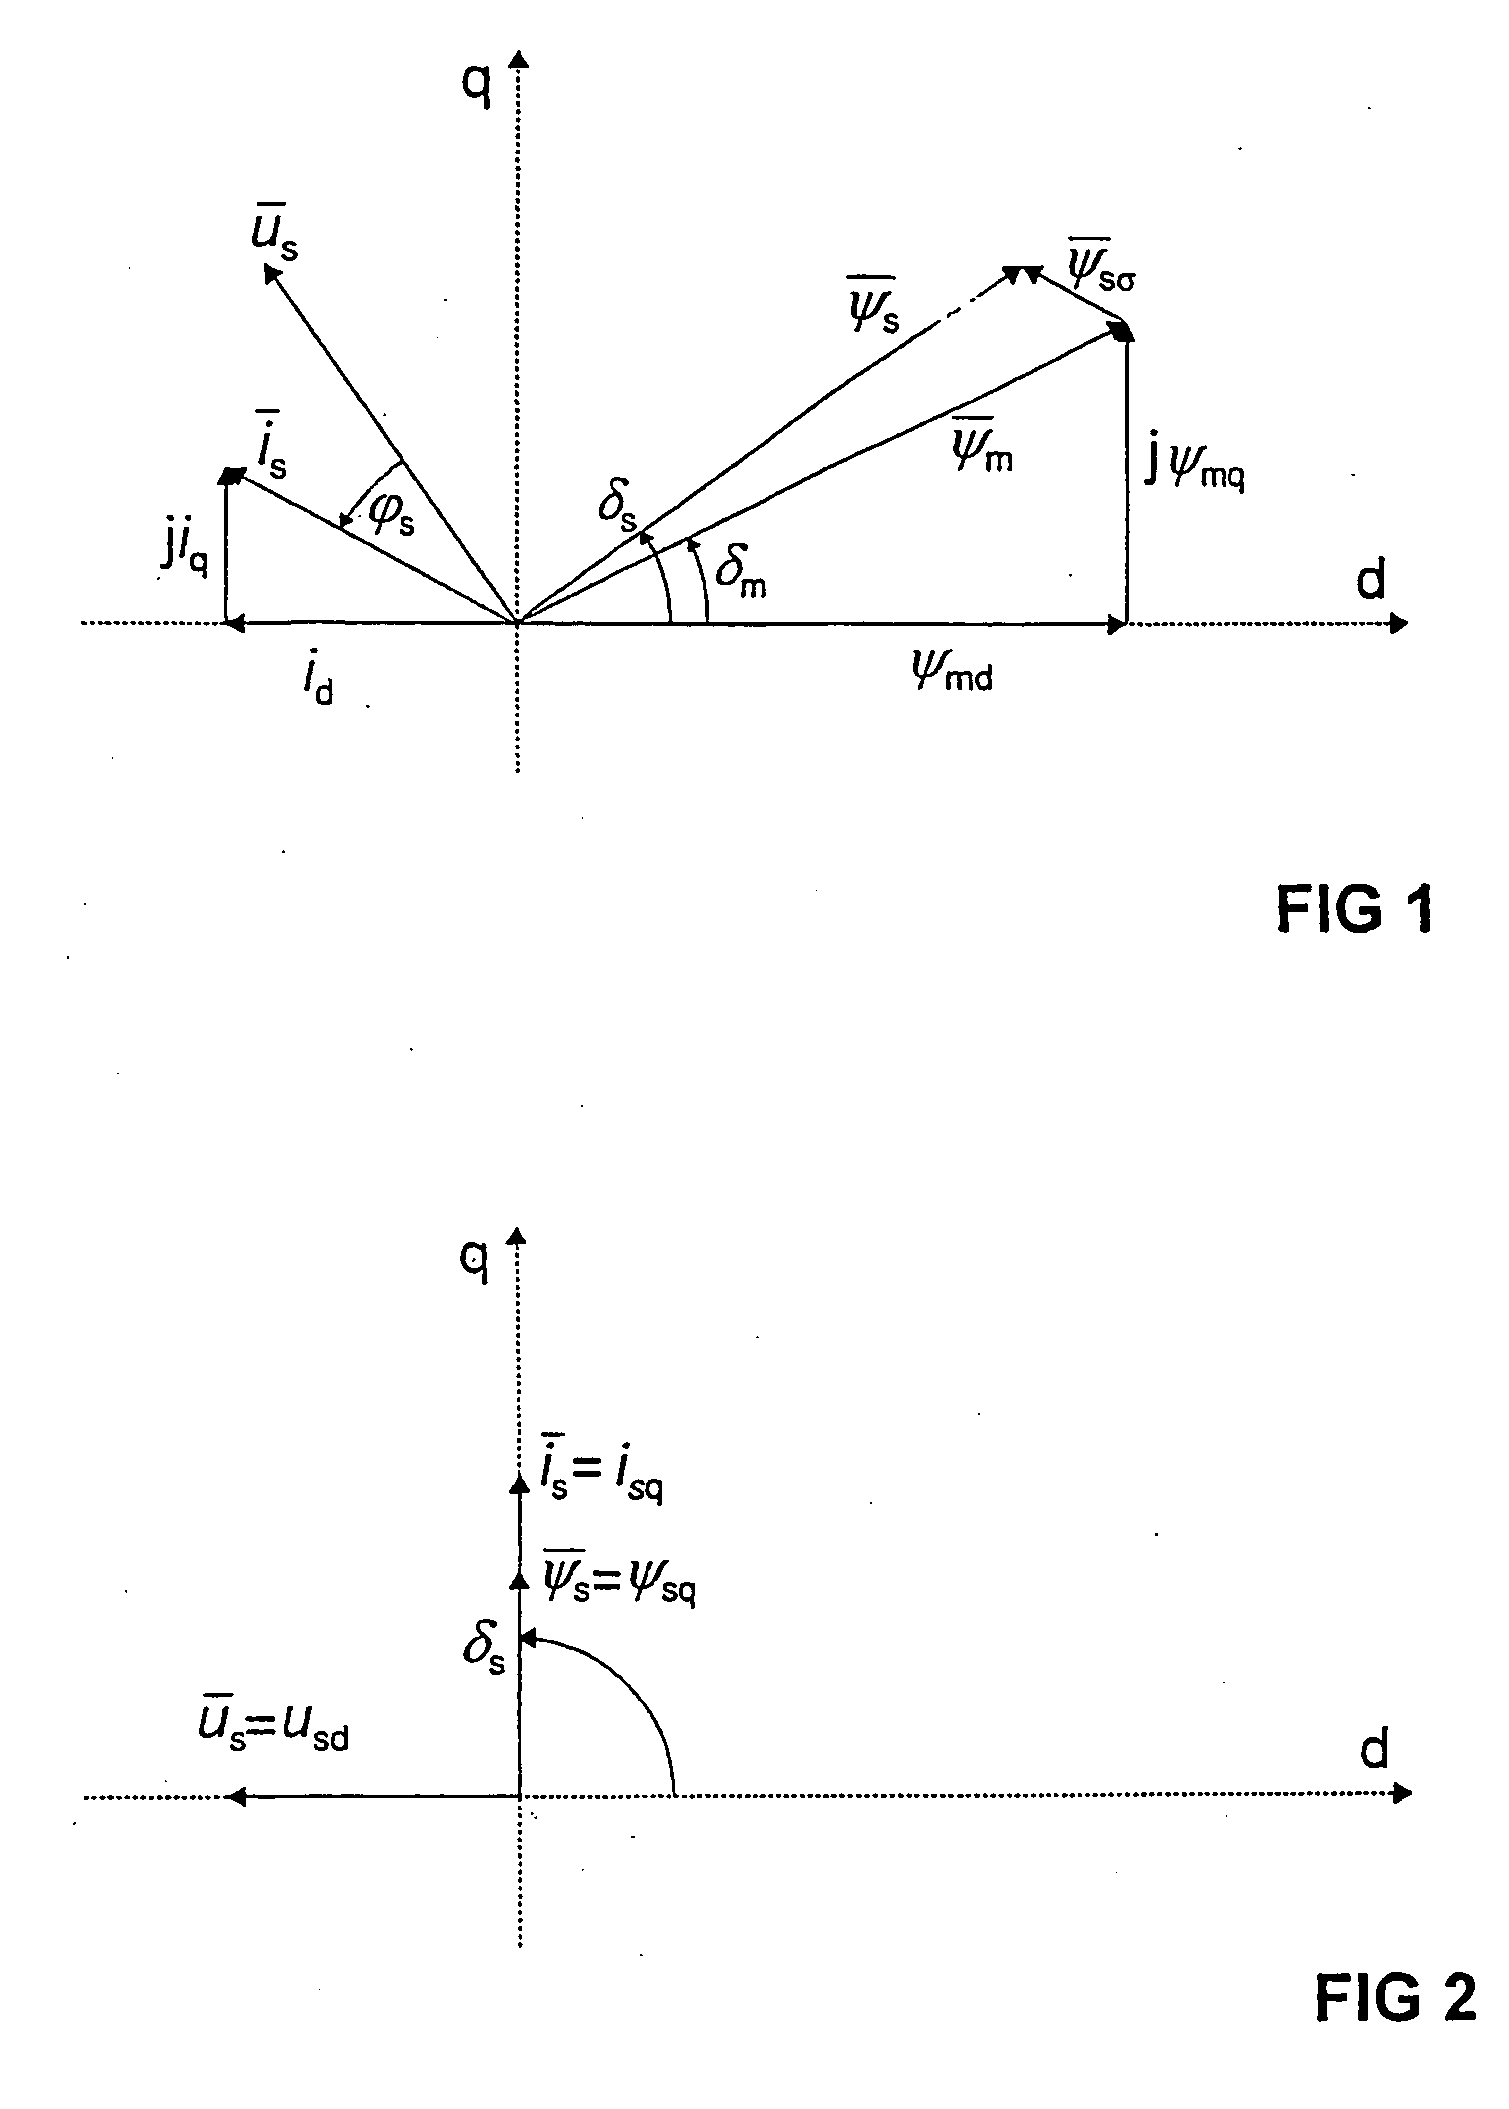 Method for defining quadrature-axis magnetizing inductance of synchronous machine